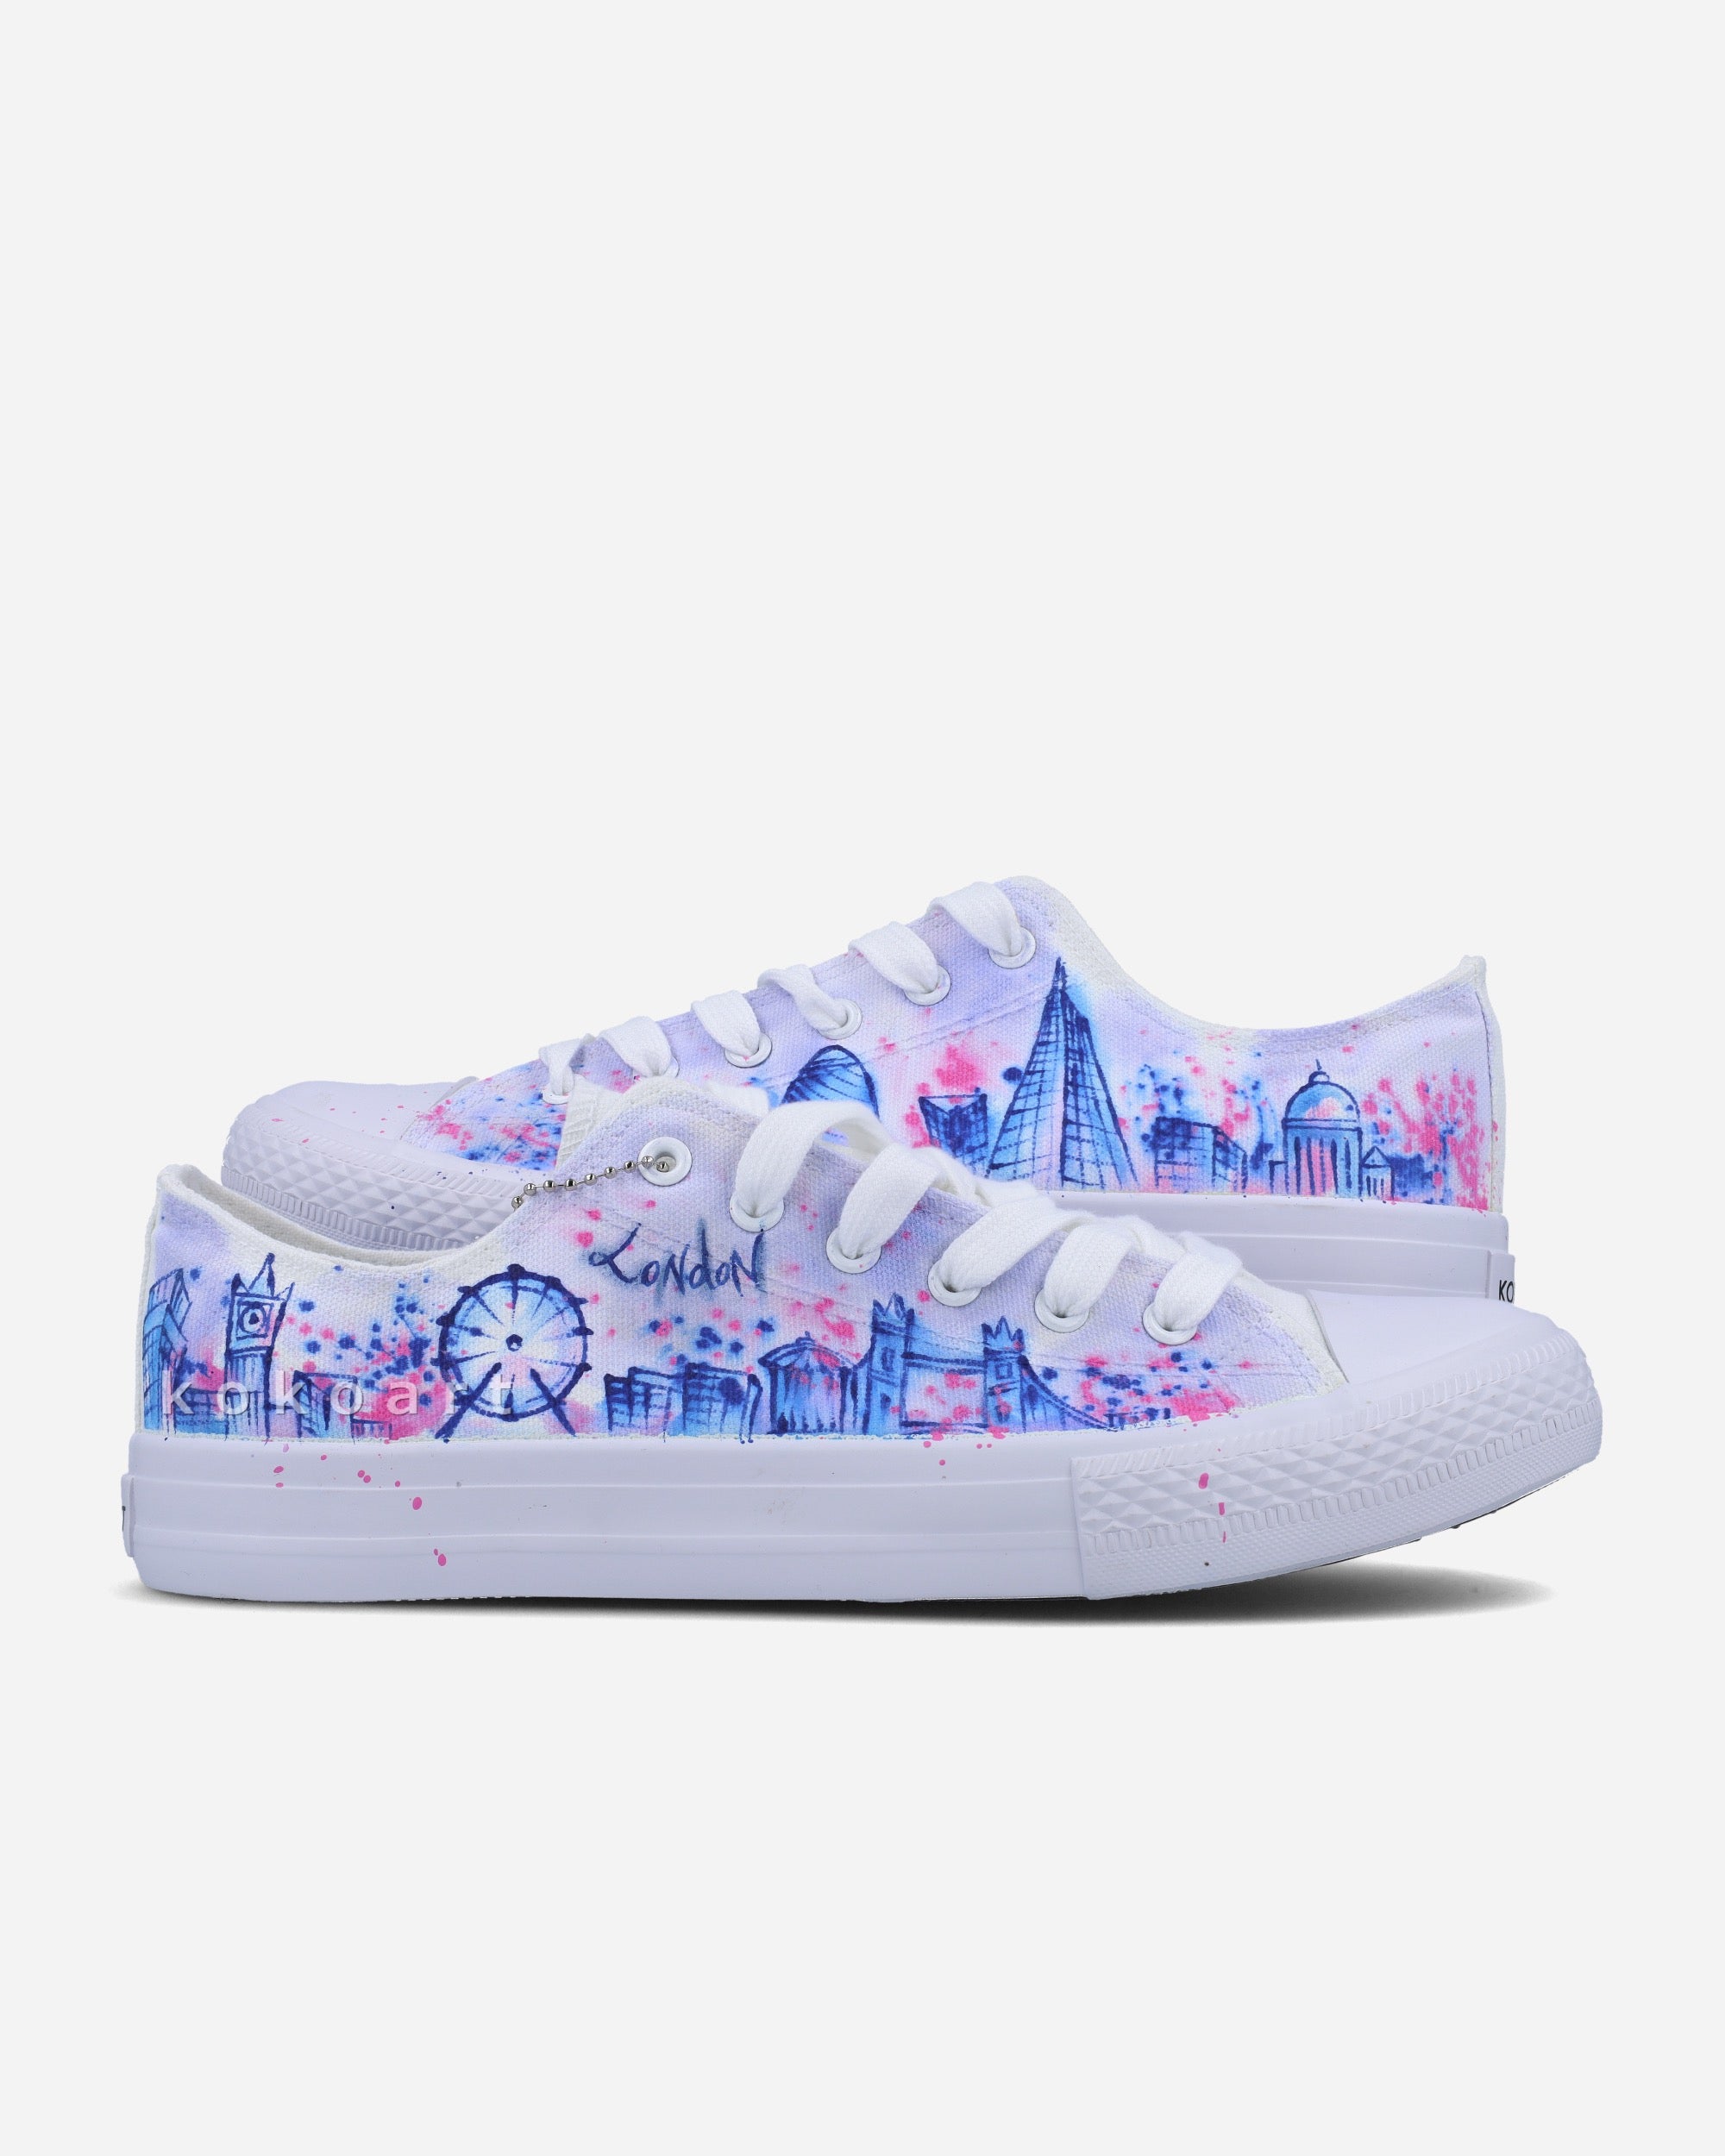 London Skyline Watercolour Hand Painted Shoes